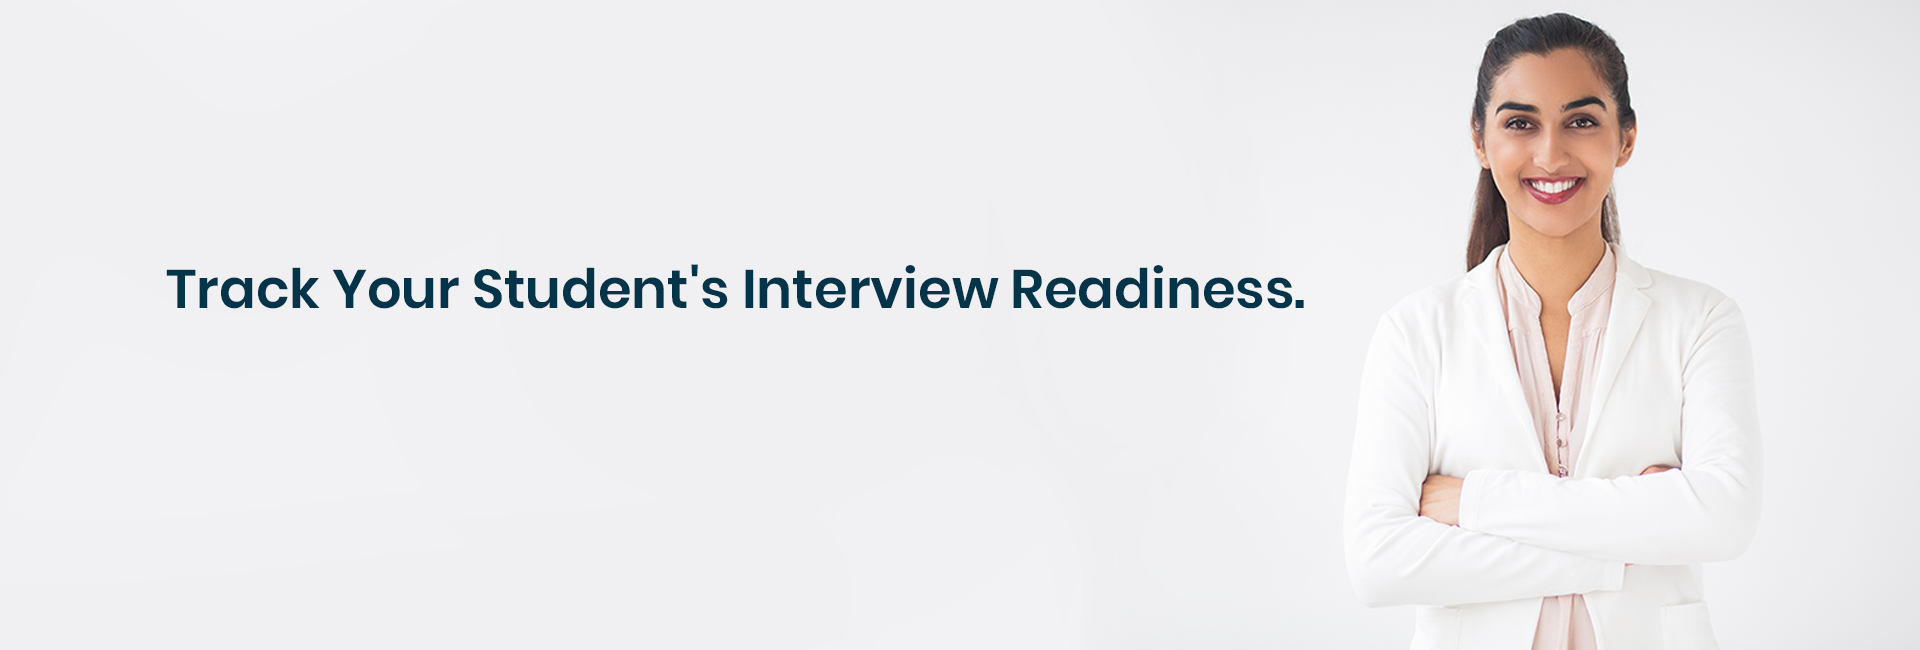 Track your Student's Interview Readiness